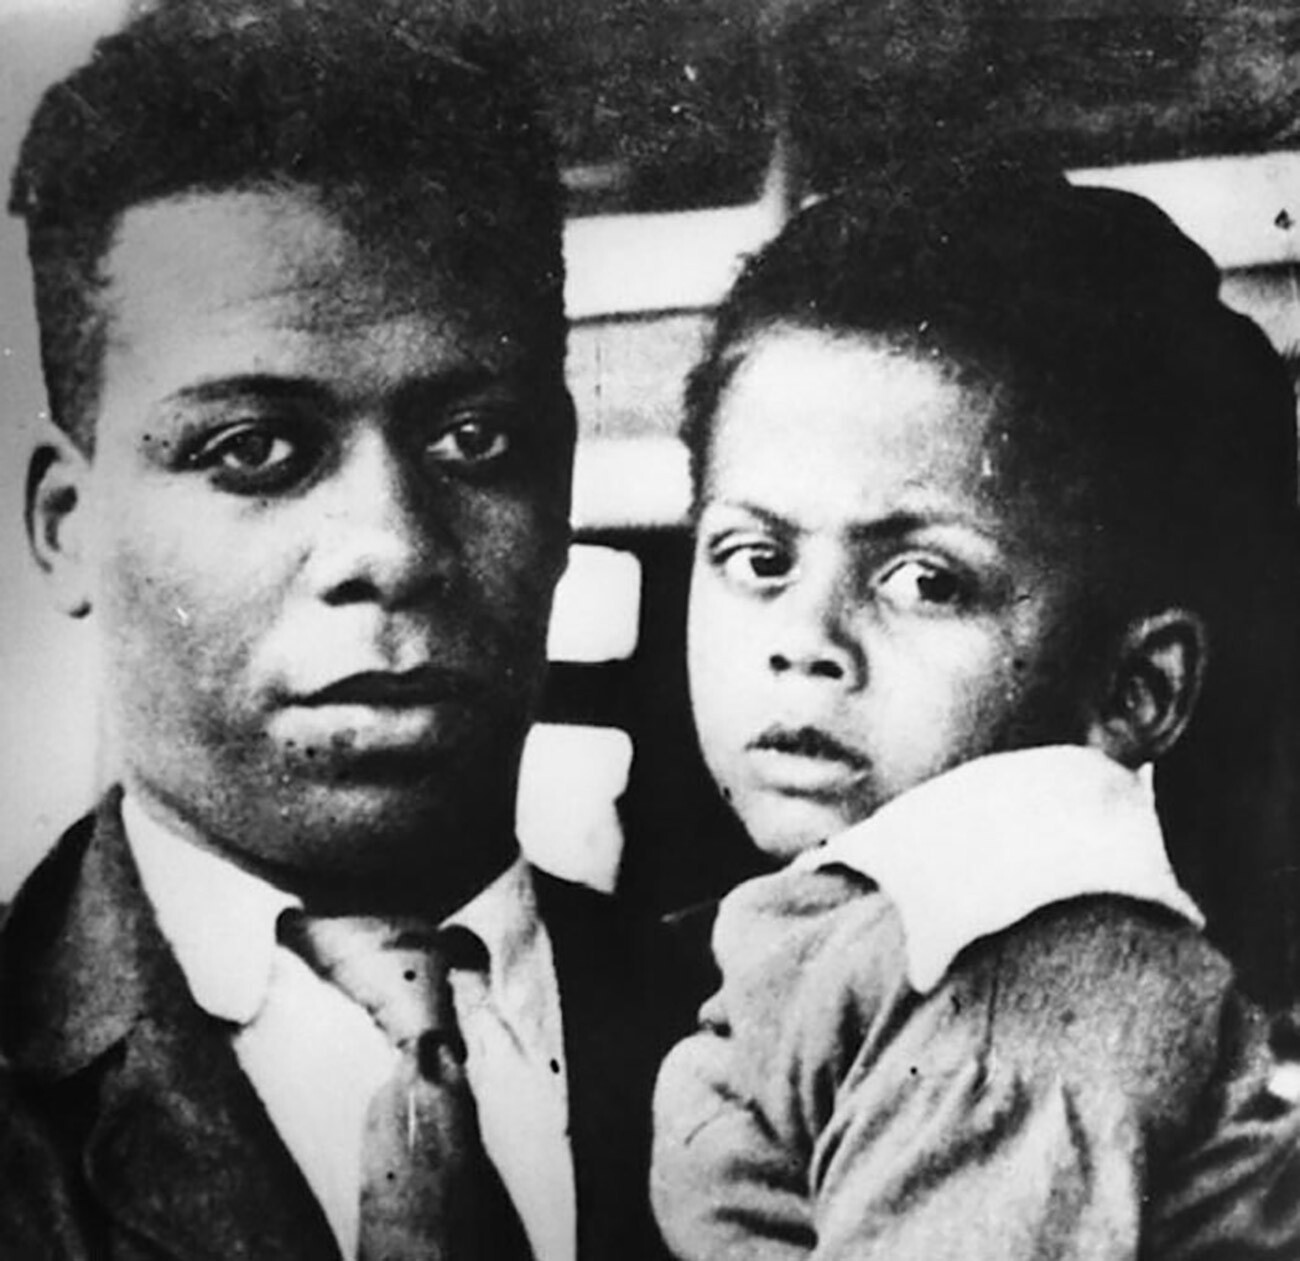 Lloyd Patterson with his son James